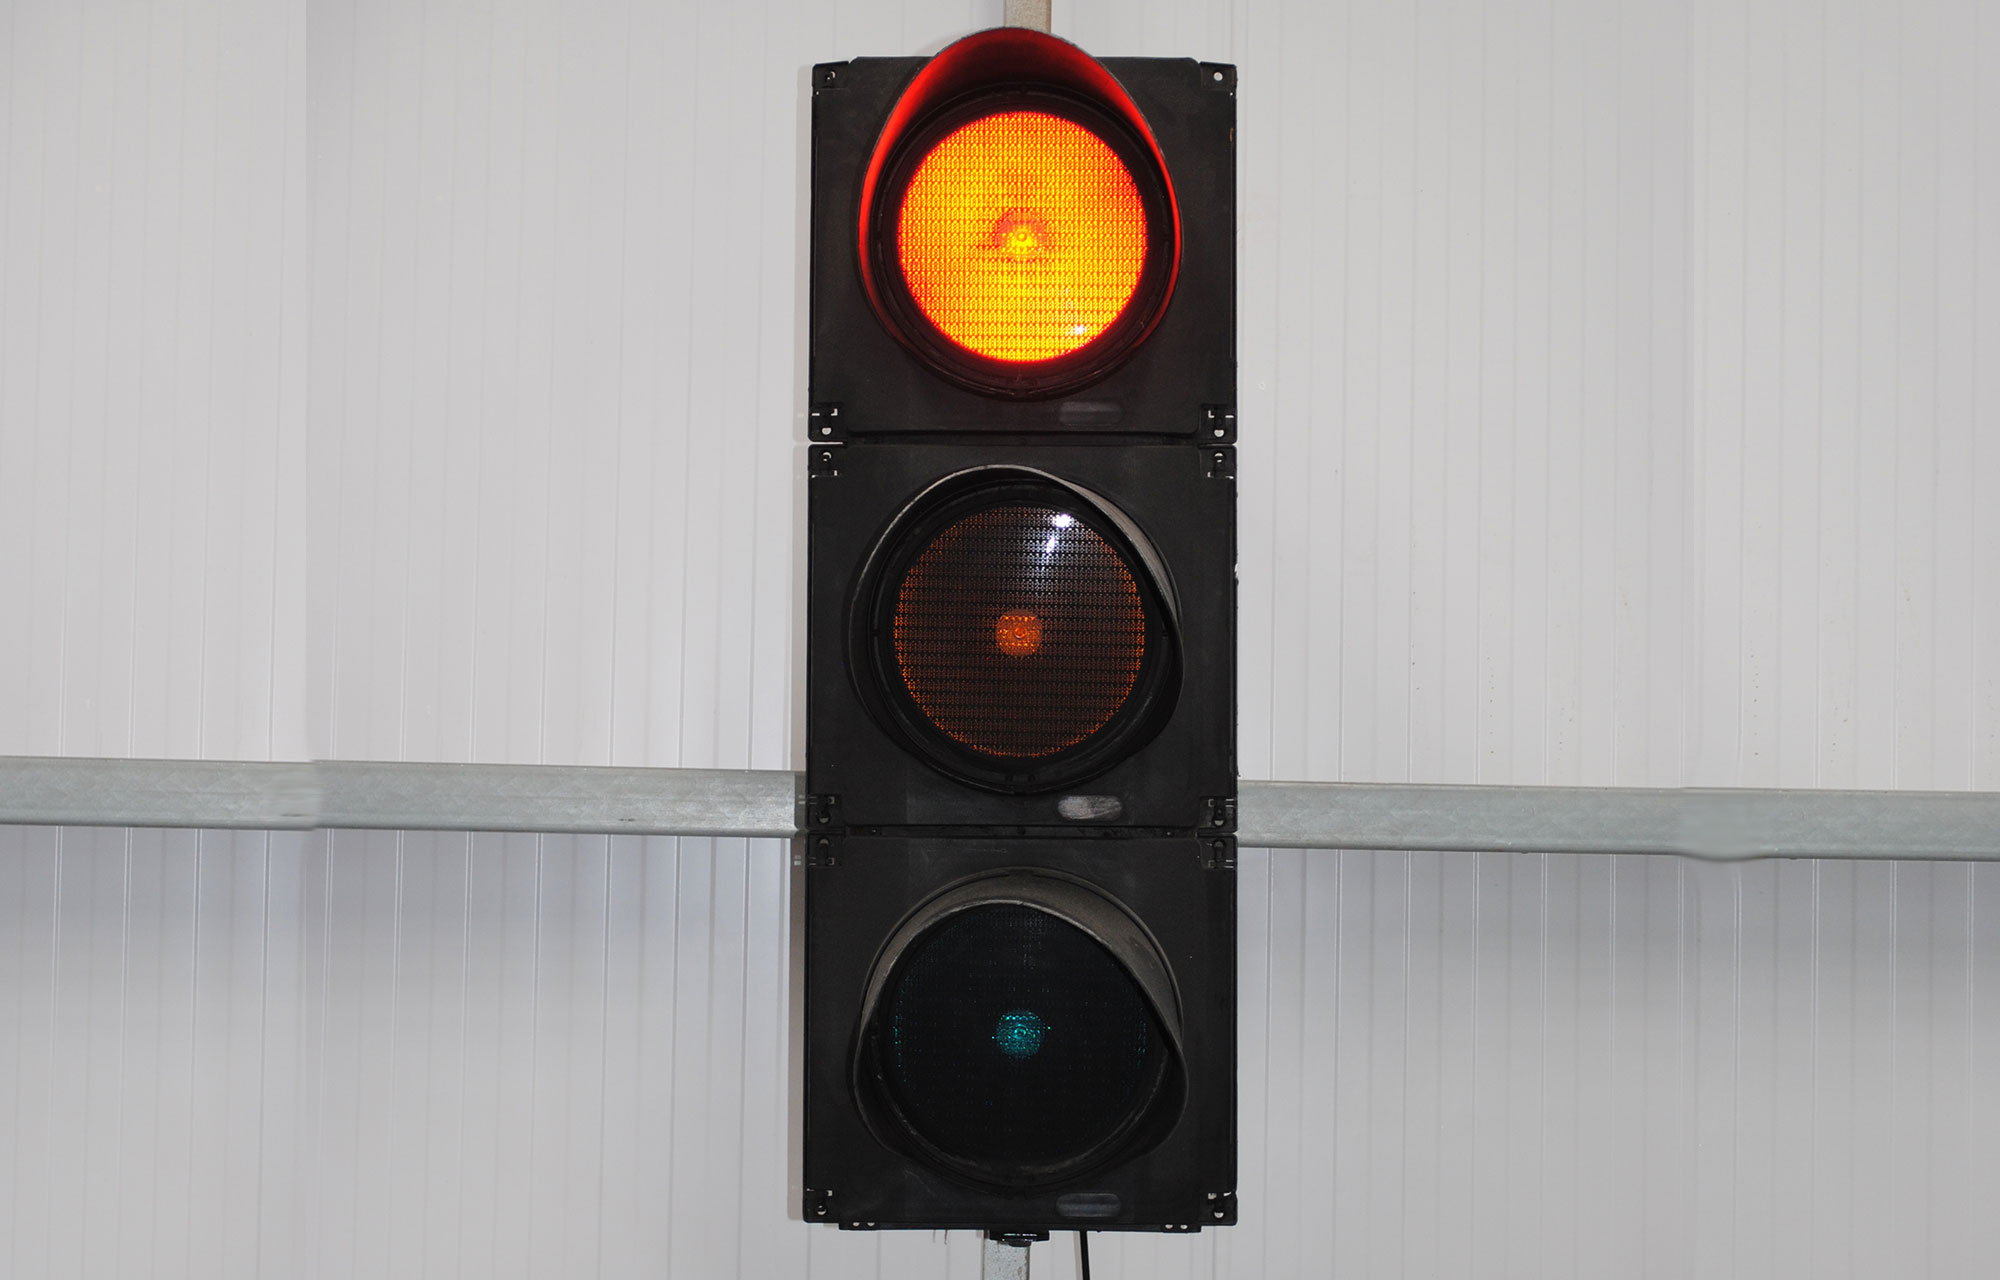 Full Size Remote Control Traffic Lights